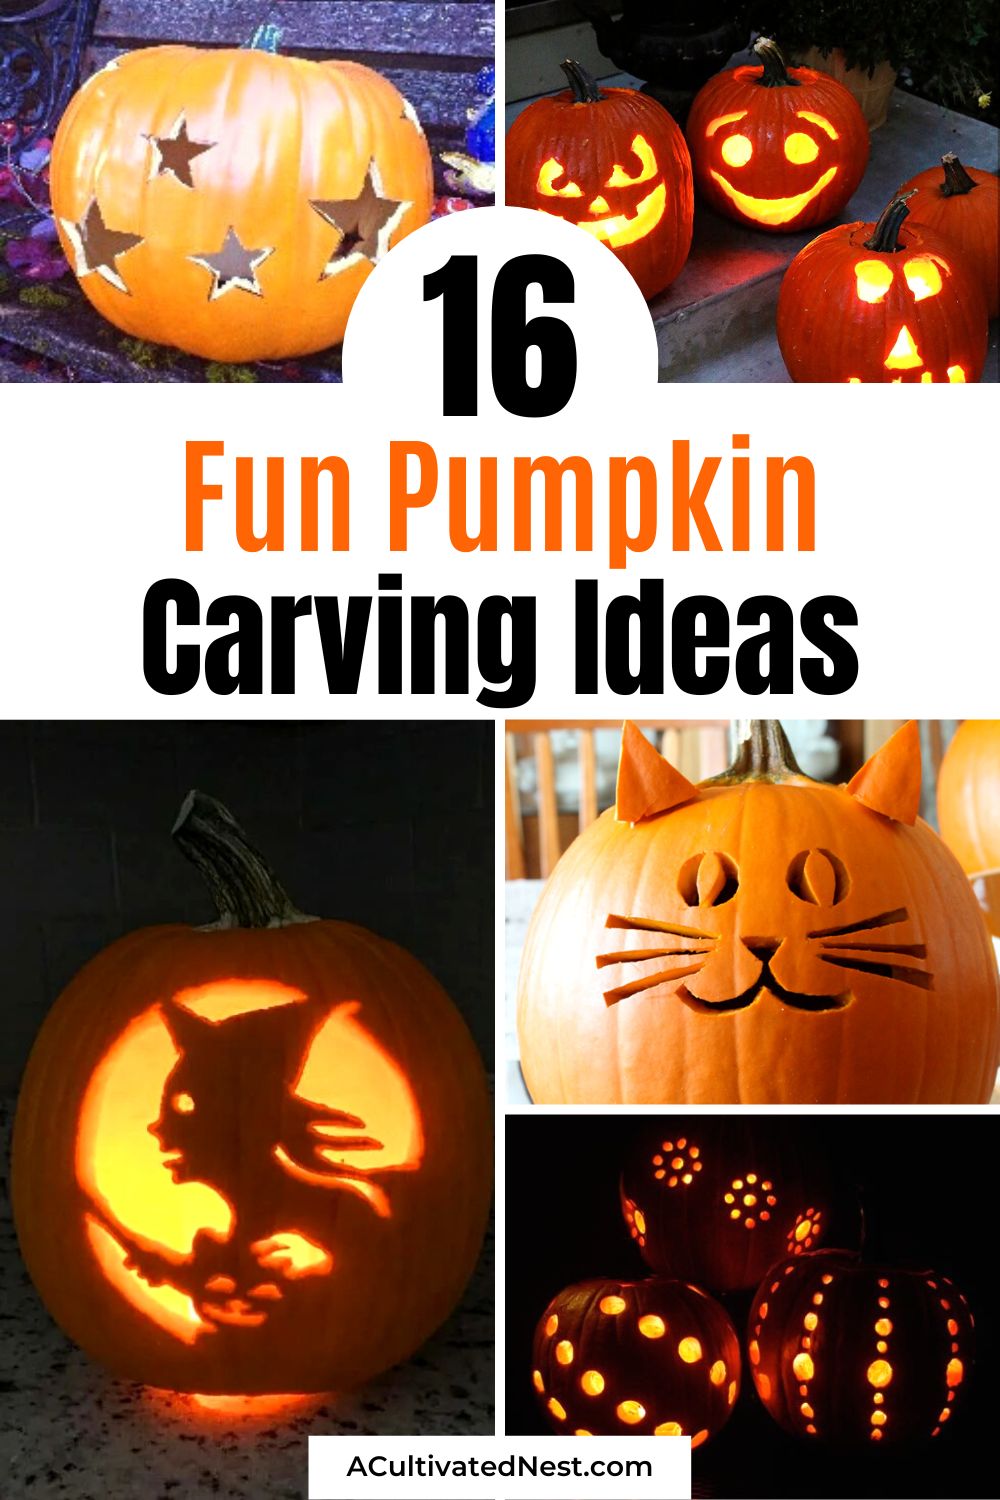 16 Fun Pumpkin Carving Ideas- Ready to transform your pumpkins into masterpieces? Explore these fun pumpkin carving ideas for a memorable Halloween season. Get inspired and carve your way to a spooktacular display! | #PumpkinDesigns #HalloweenFun #Halloween #DIY #ACultivatedNest